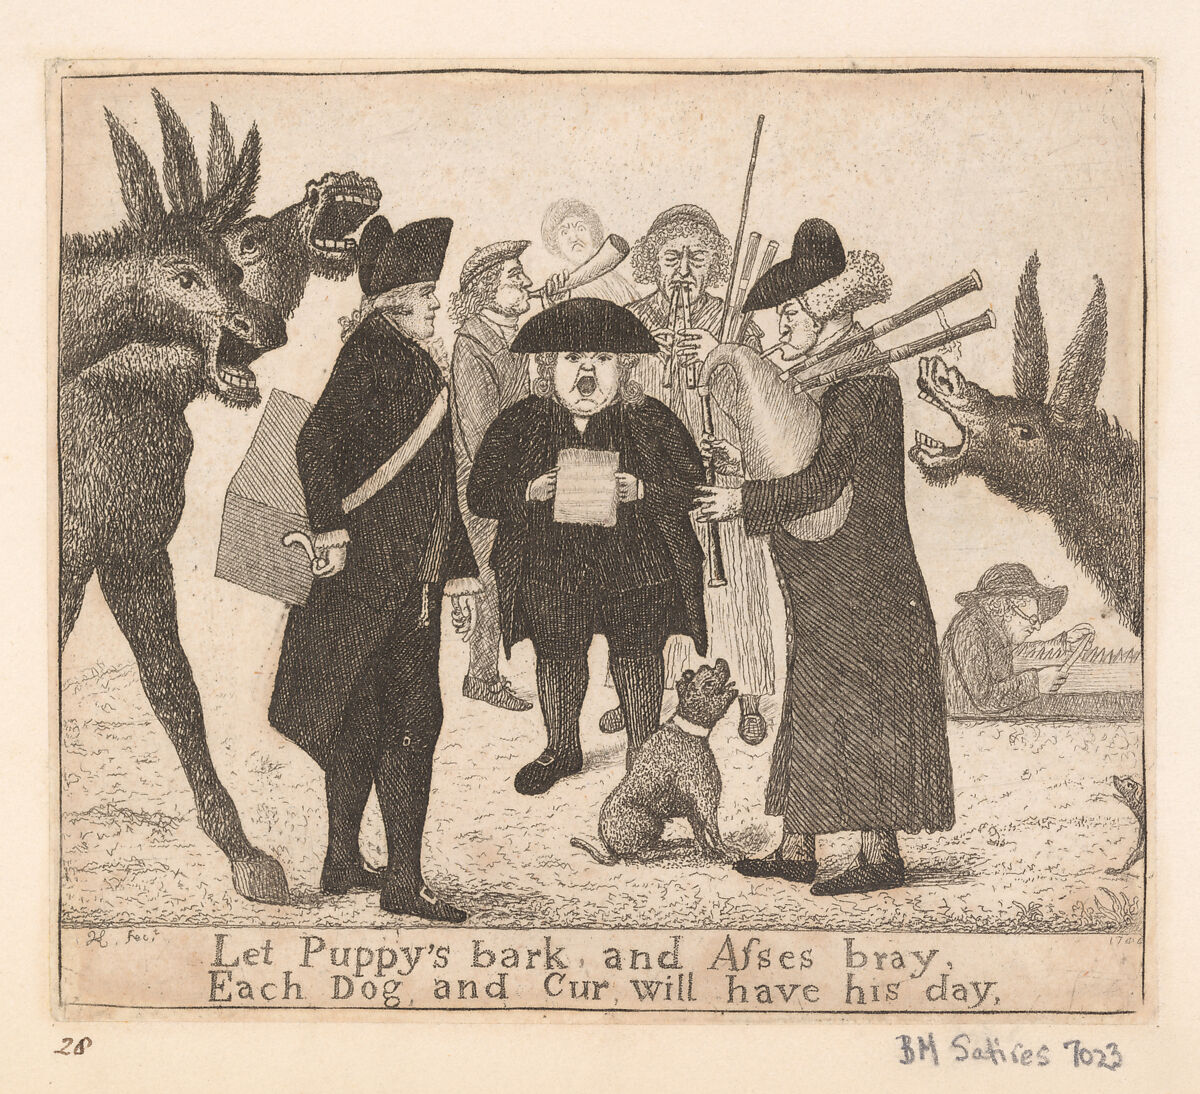 Let Puppys Bark and Asses Bray, Each Dog and Cur Will Have His Day: Alexander Campbell, John Campbell and Jamie Duff, John Kay  British, Scottish, Etching